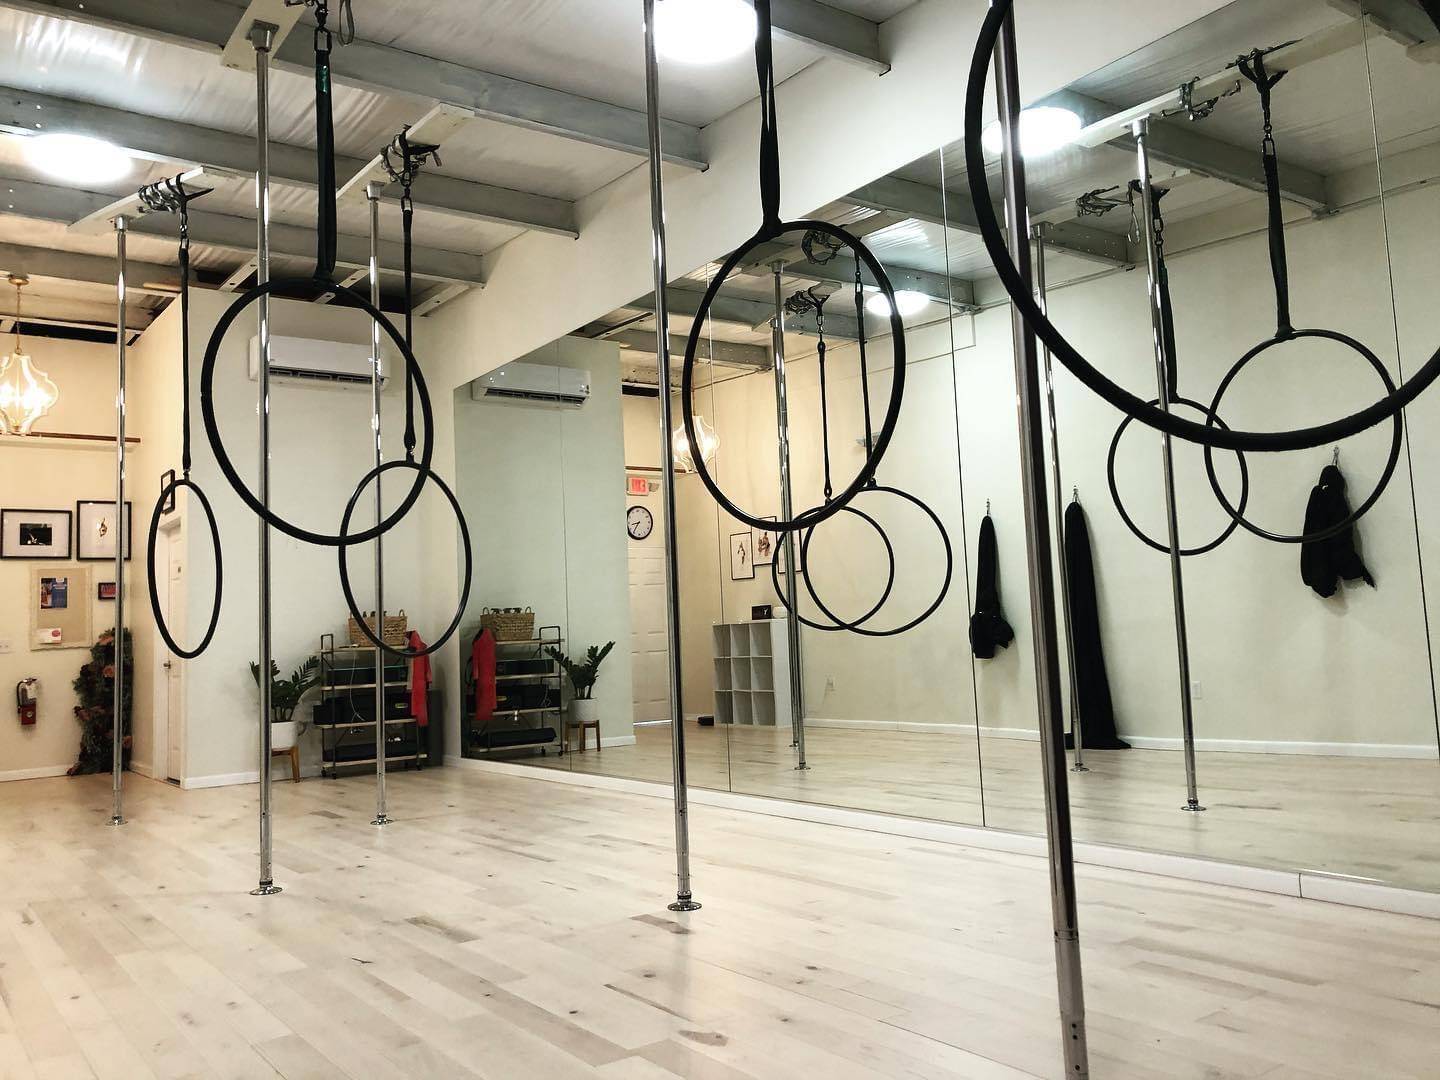 The Studio is a small space with amazing energy with 5 stainless Poles, 5 Silks, 5 hammocks, 5 hoops, 5 crash mats.